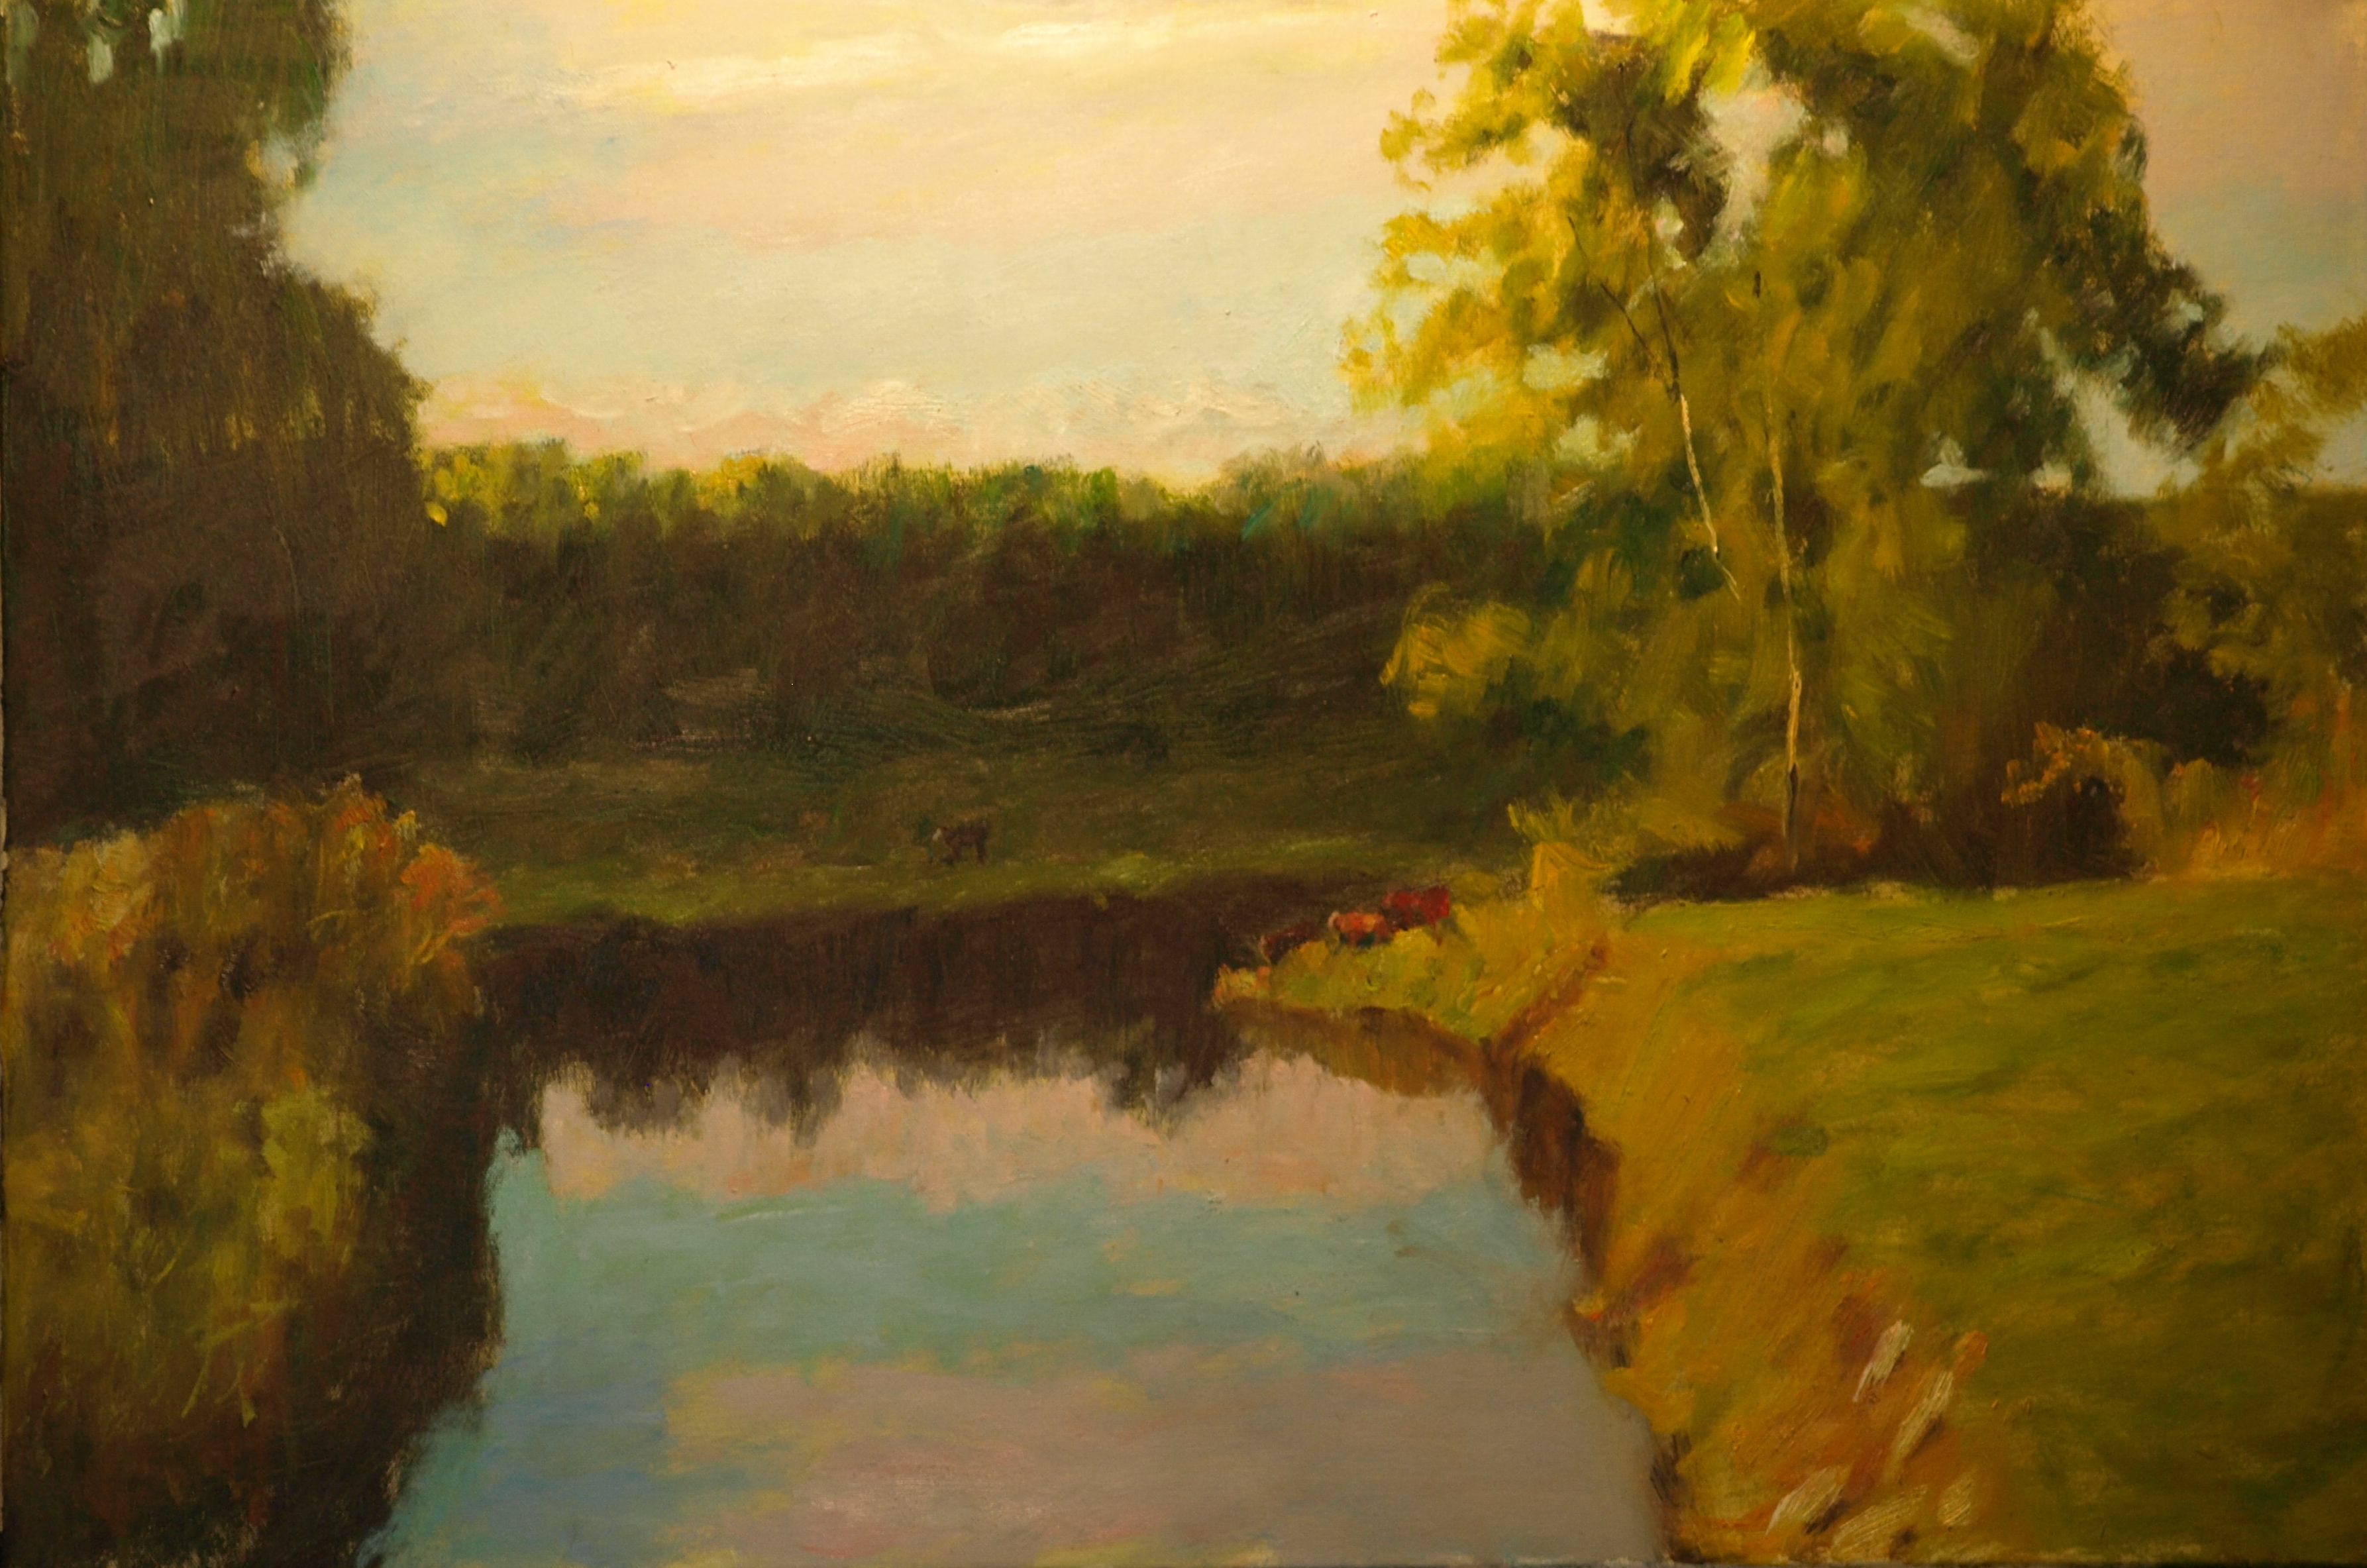 Distant Cows, Oil on Canvas, 24 x 36 Inches, by Richard Stalter, $1200